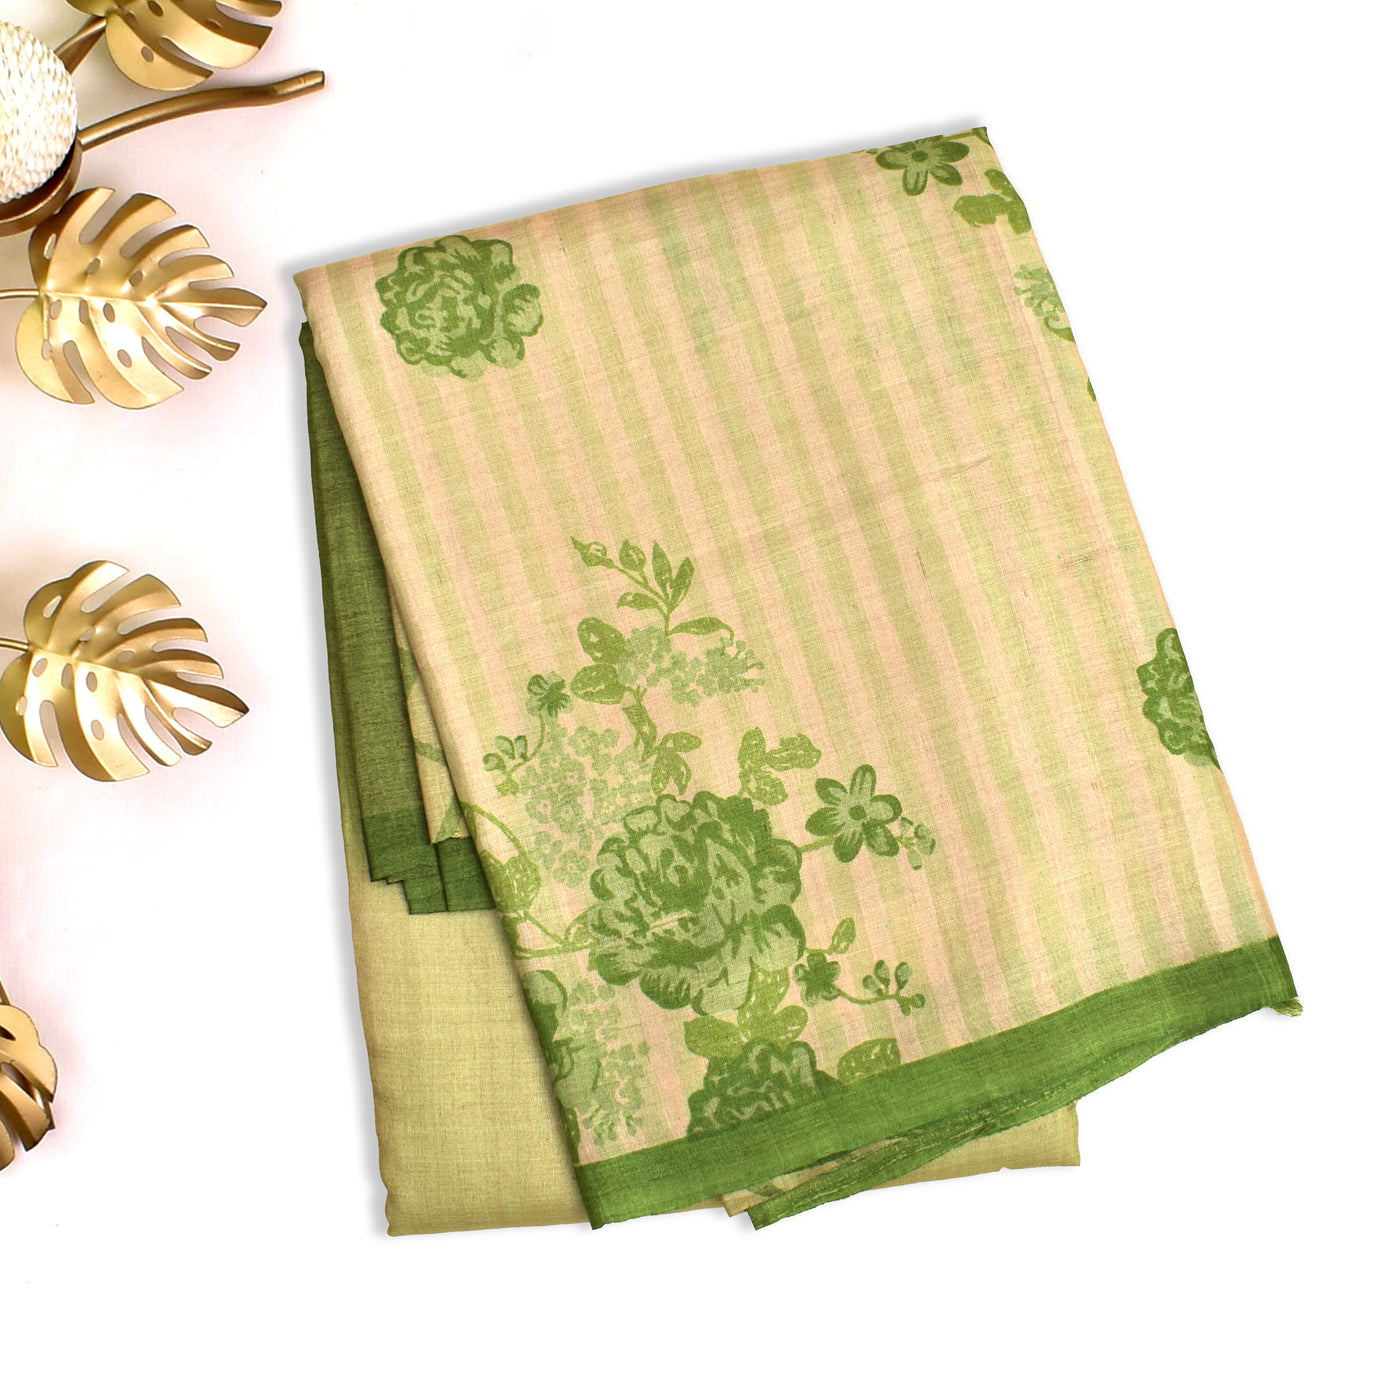 Off White and Green Tussar Silk Saree with Stripes and Floral Design